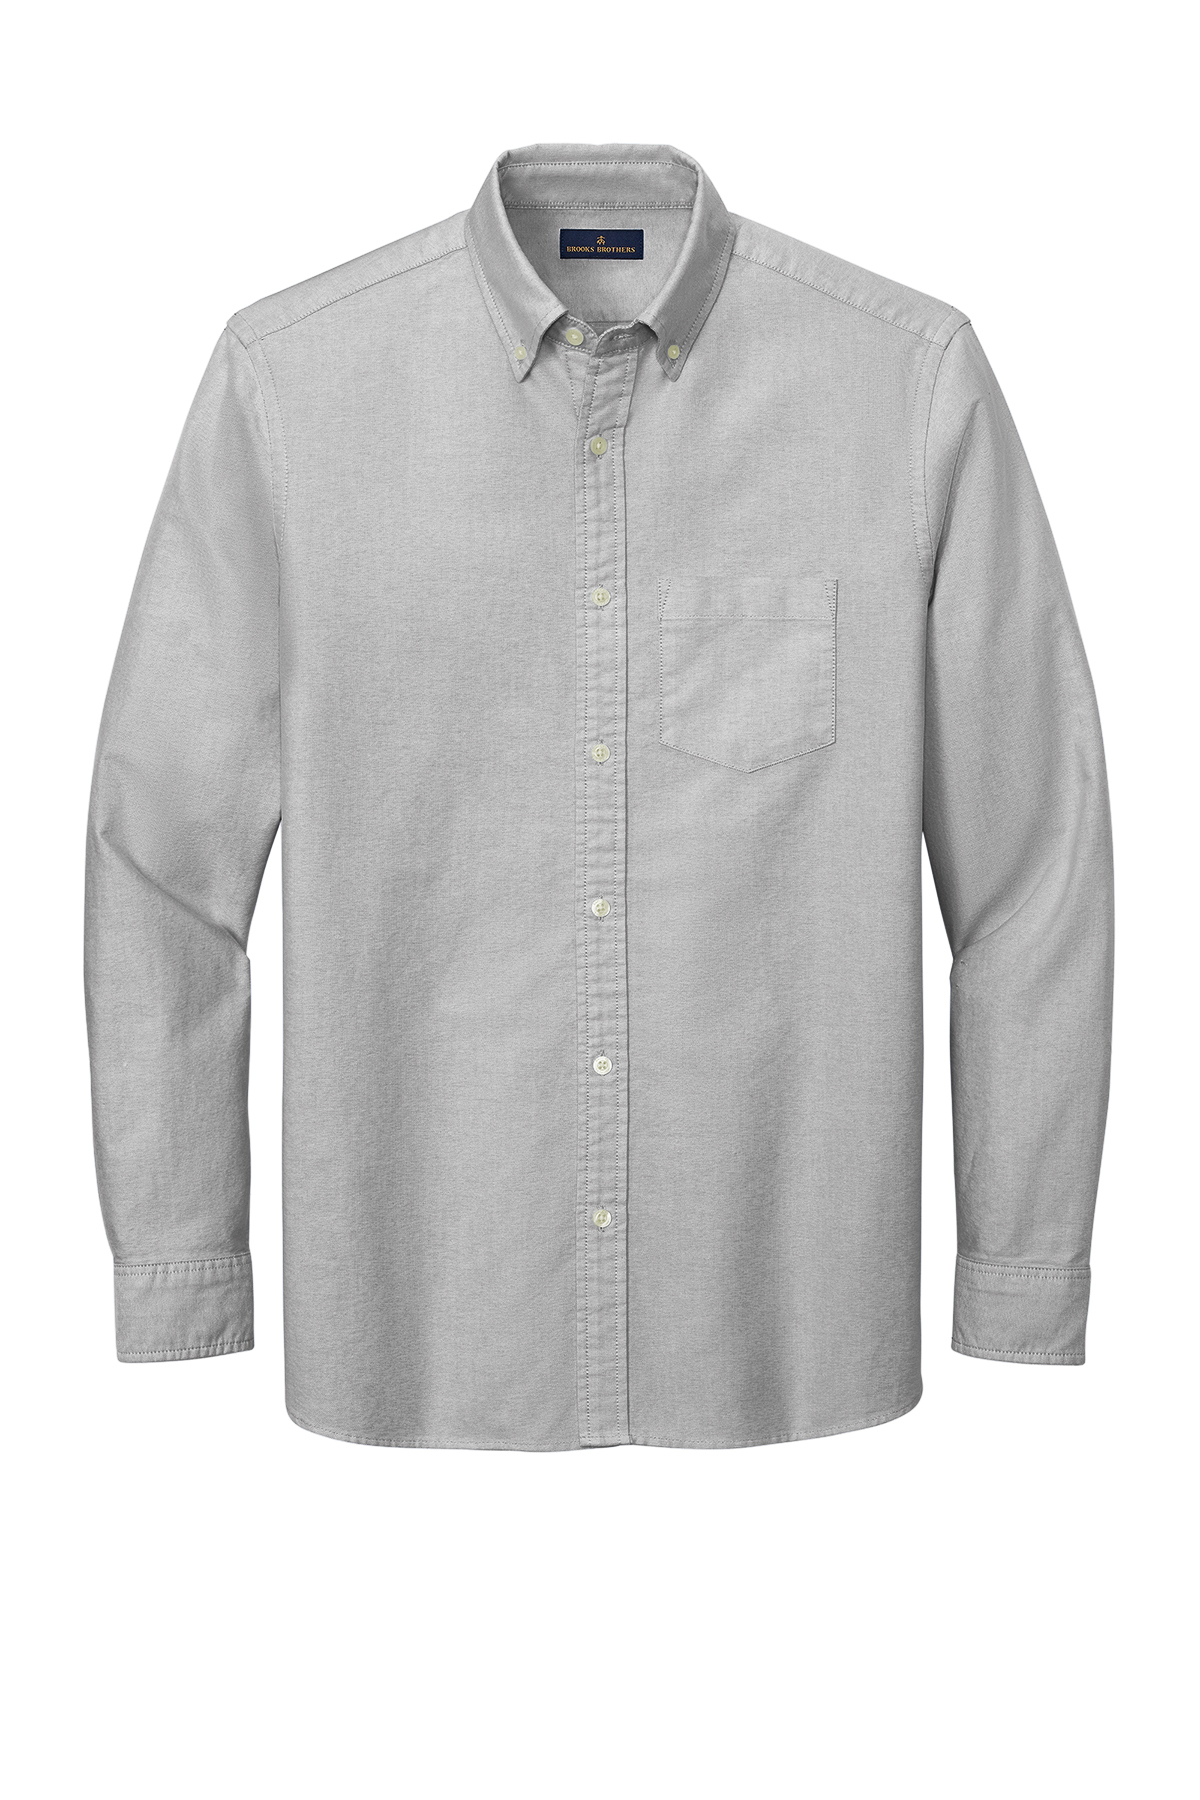 Brooks Brothers Casual Oxford Cloth Shirt | Product | Online Apparel Market